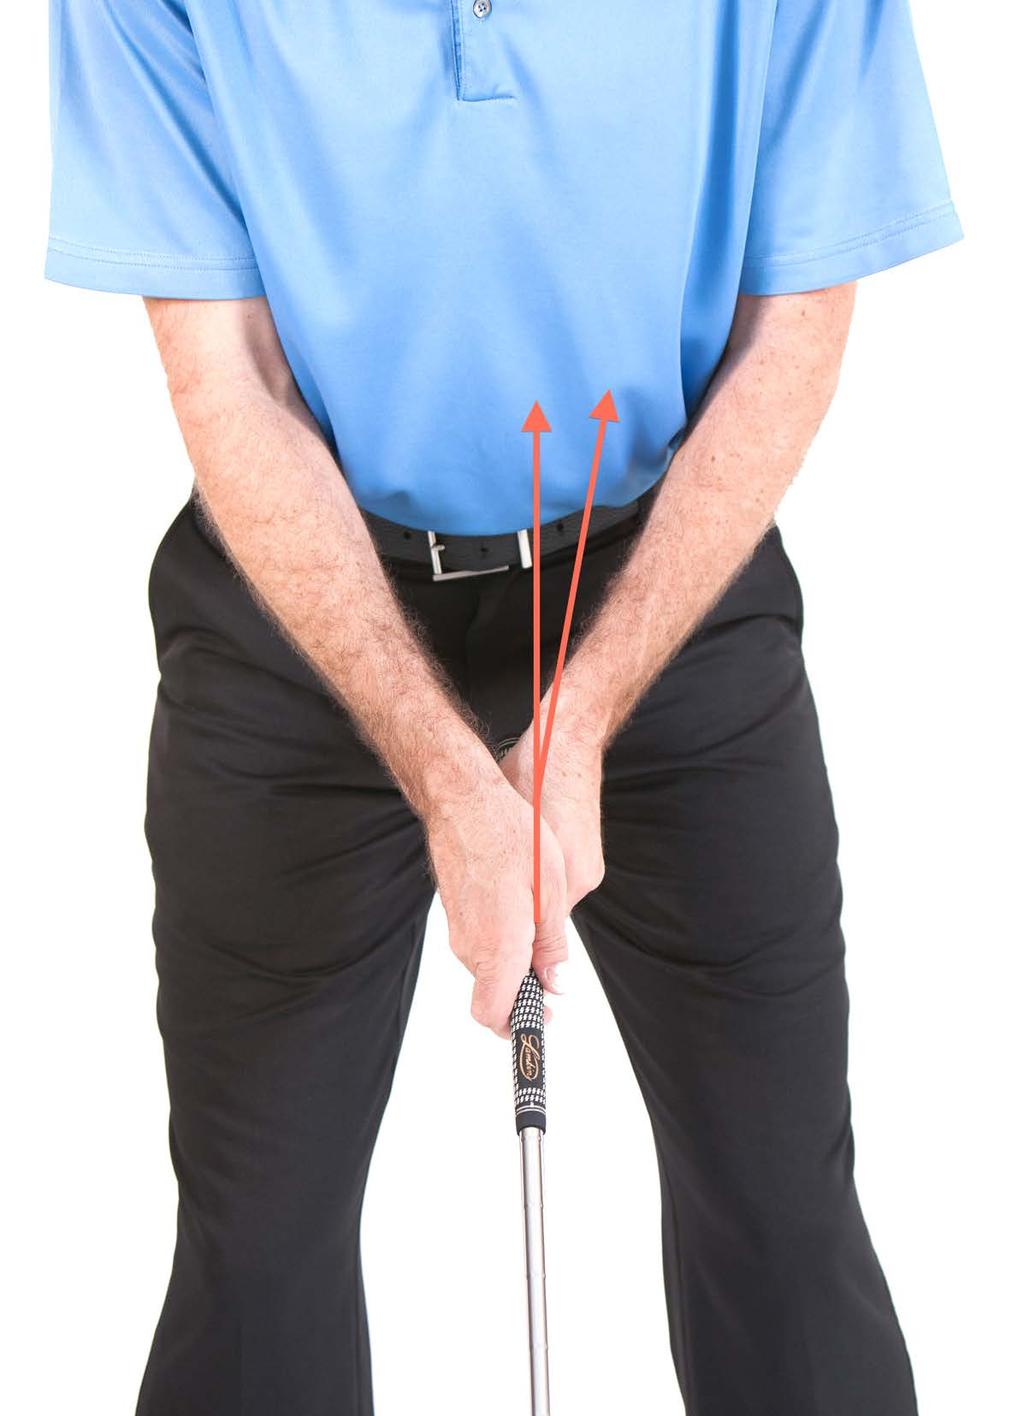 Hands Left, Open Club If you grip the club with your hands rotated too far around the shaft to your left, when you make your golf swing, your hands return to a neutral position and the club face